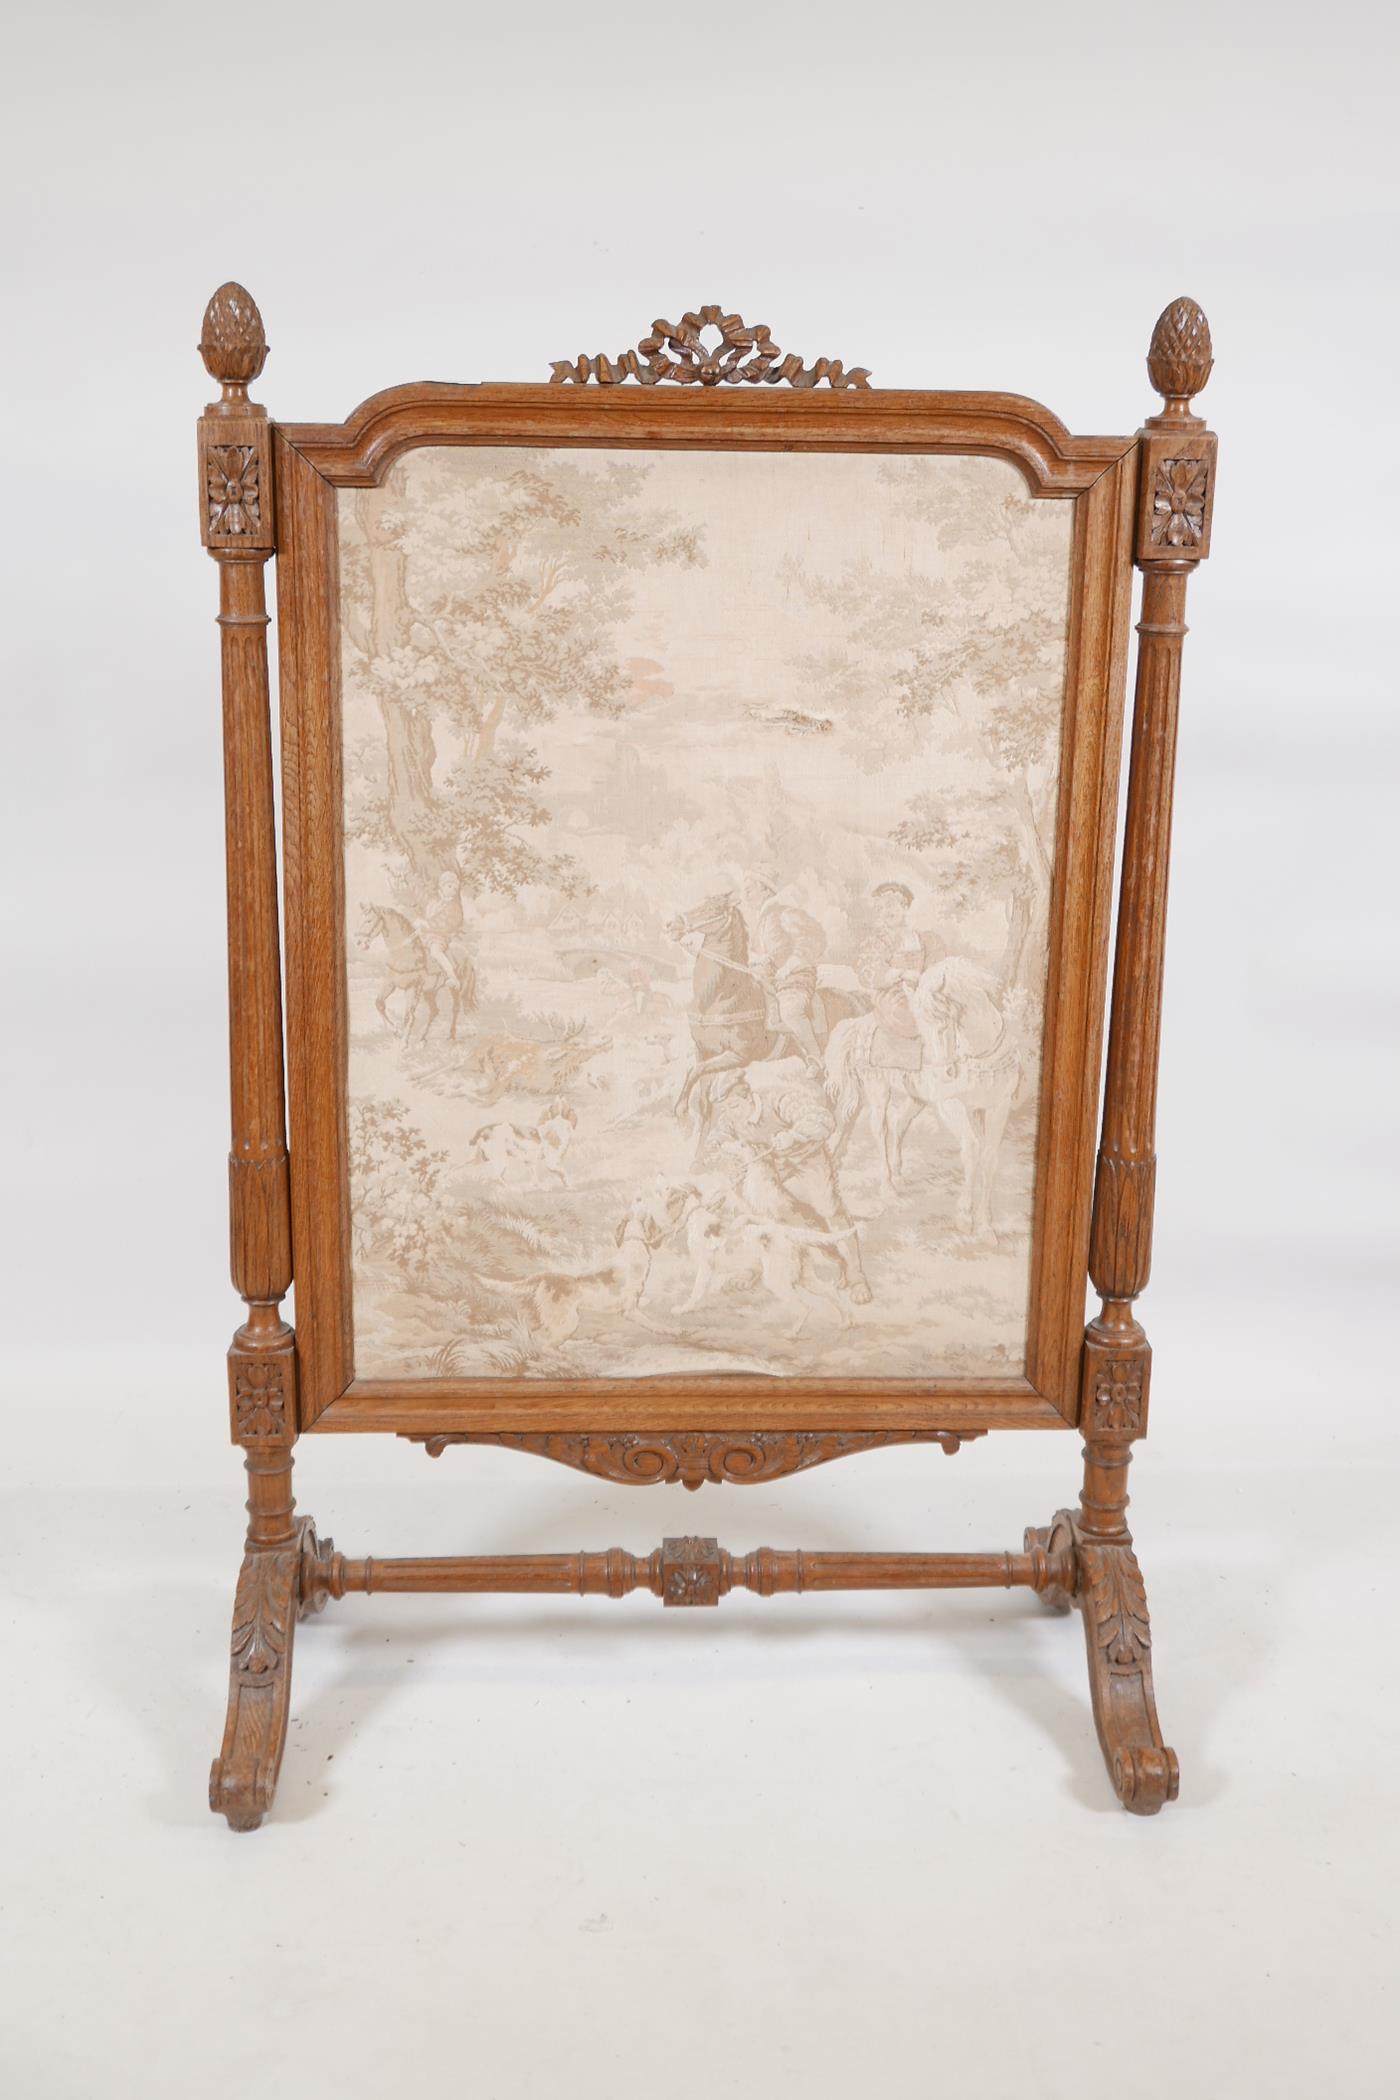 A C19th French carved oak fire screen, with pineapple and patarae decoration and fluted columns - Image 2 of 6